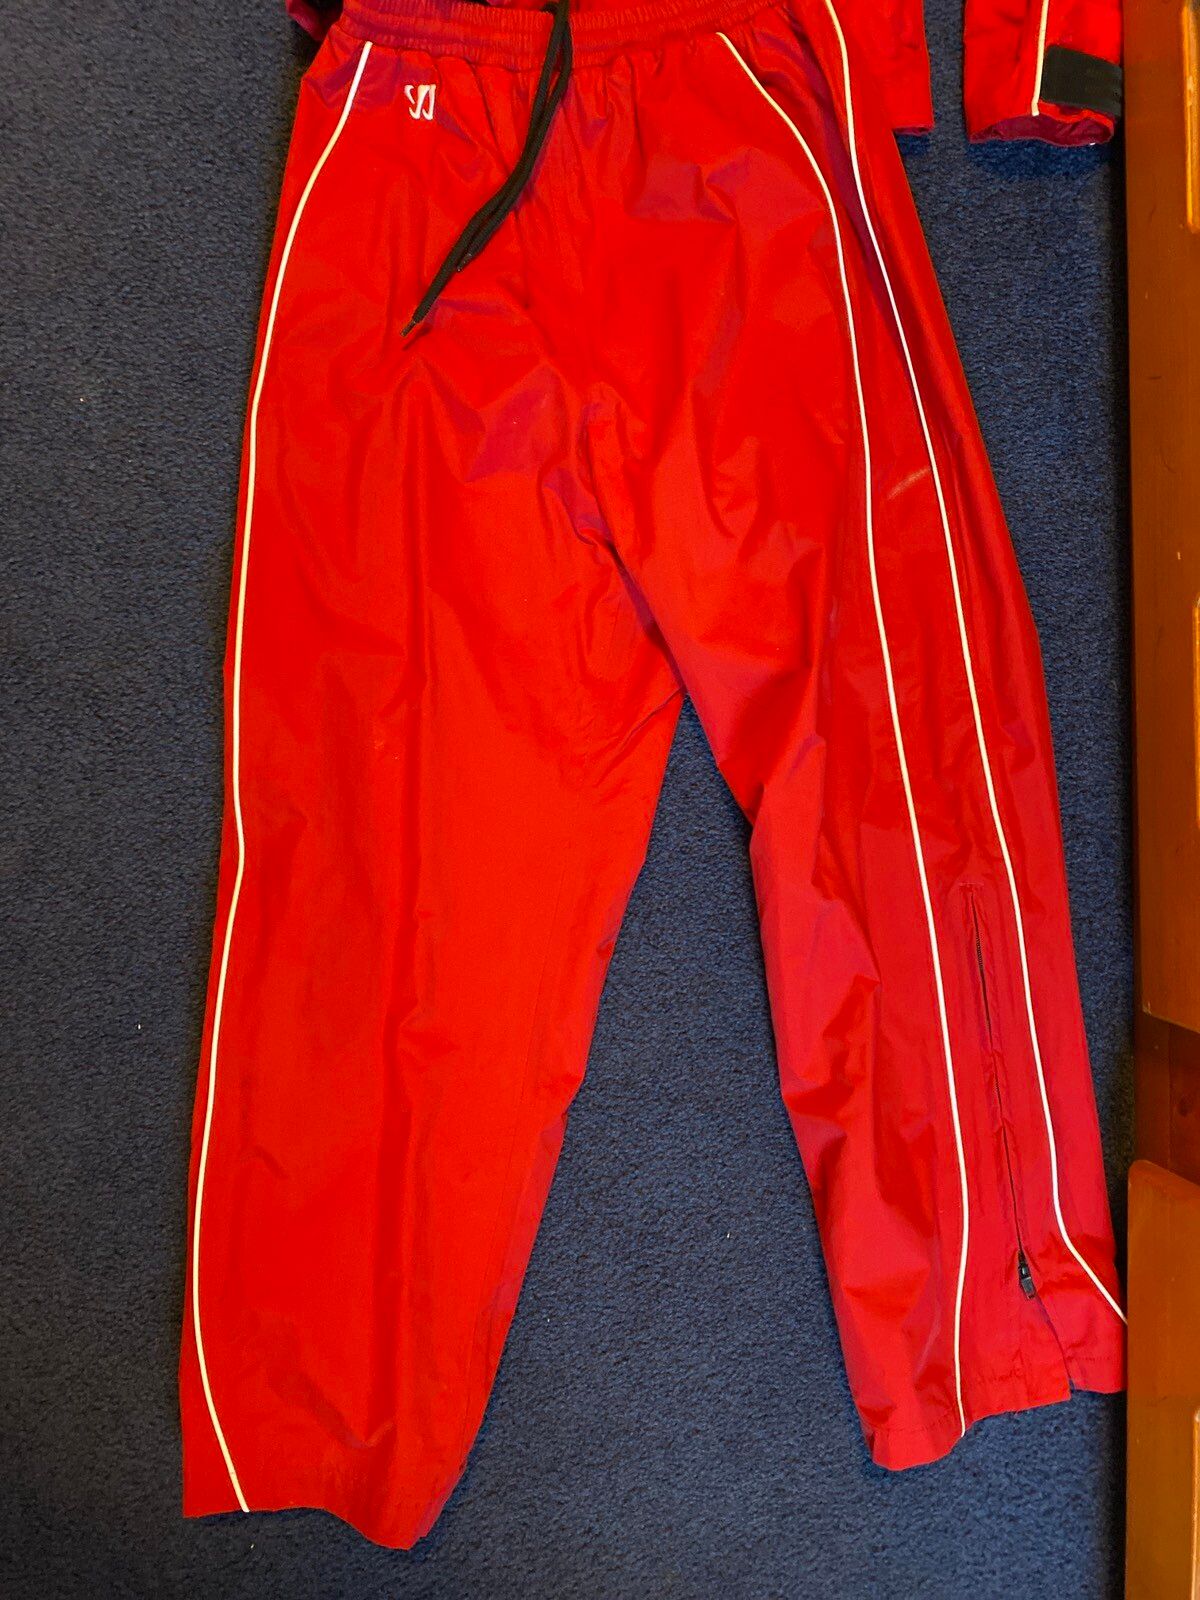 Warrior Warrior hockey warm up suit Size US S / EU 44-46 / 1 - 1 Preview